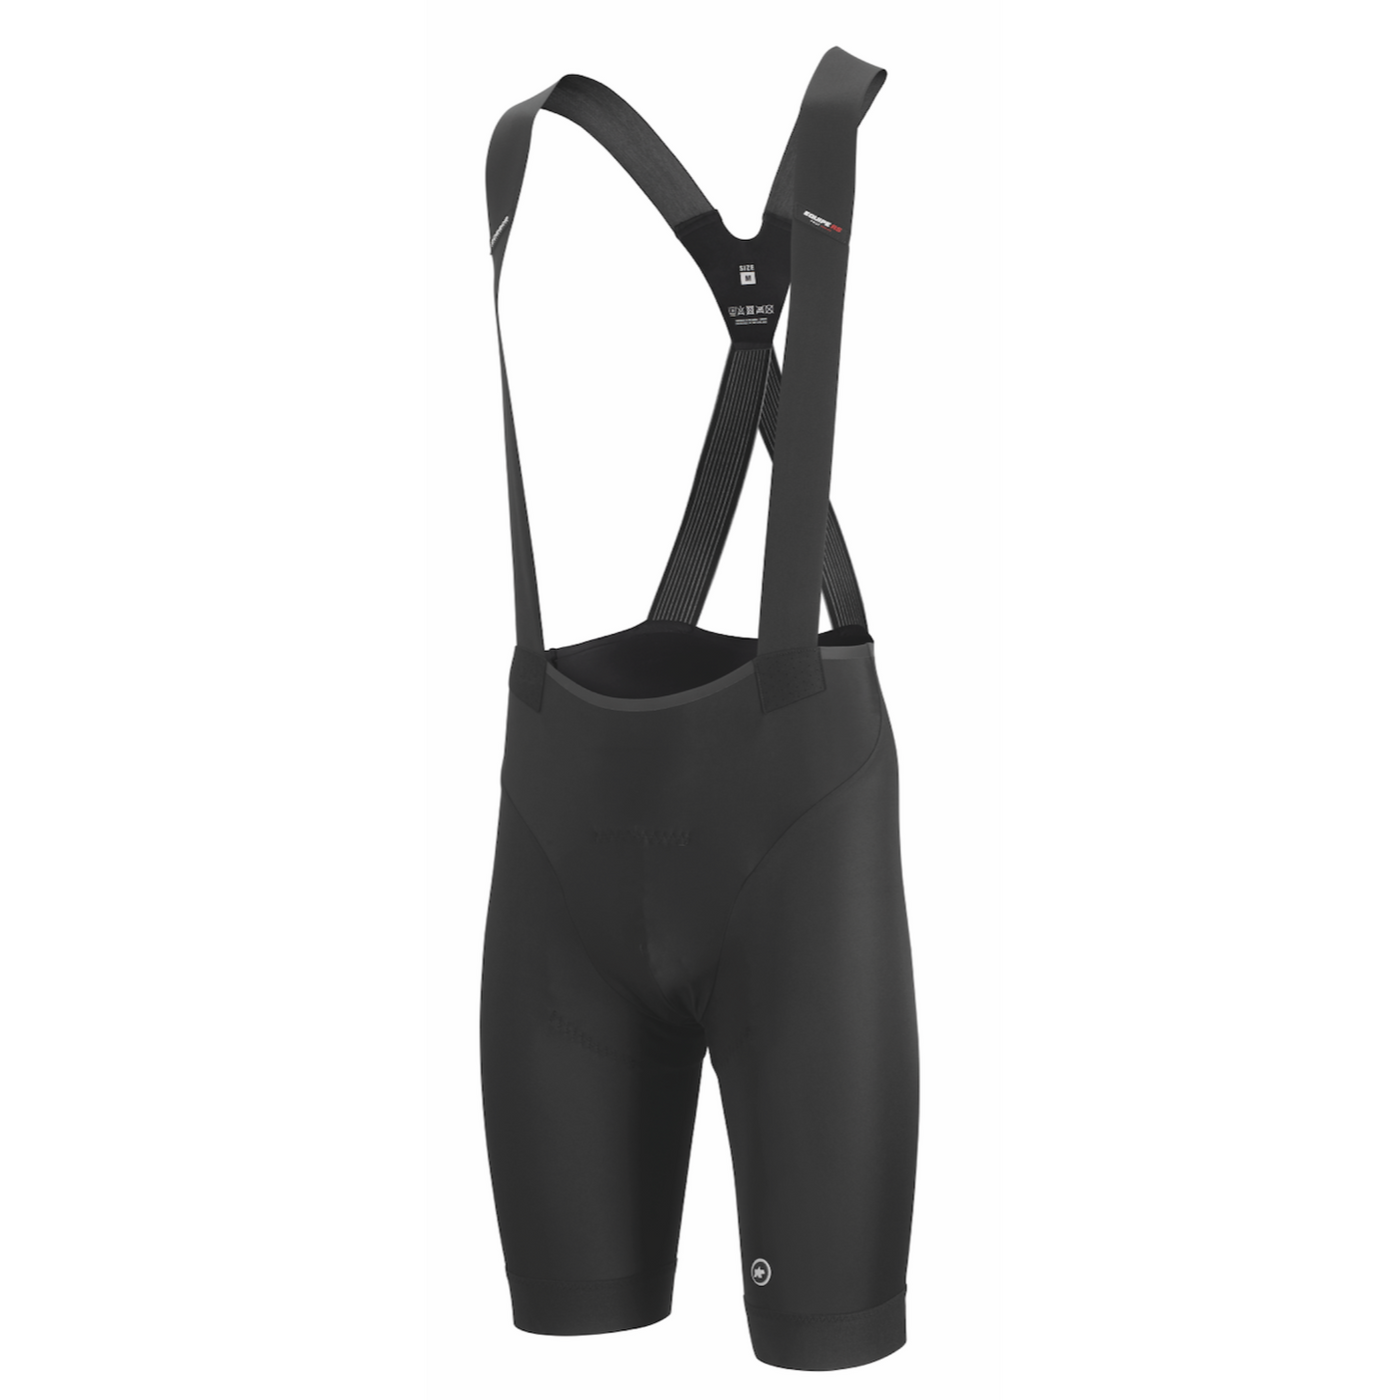 ASSOS Equipe RS S9 cykelbukser - Racing Fit m. 9mm pude